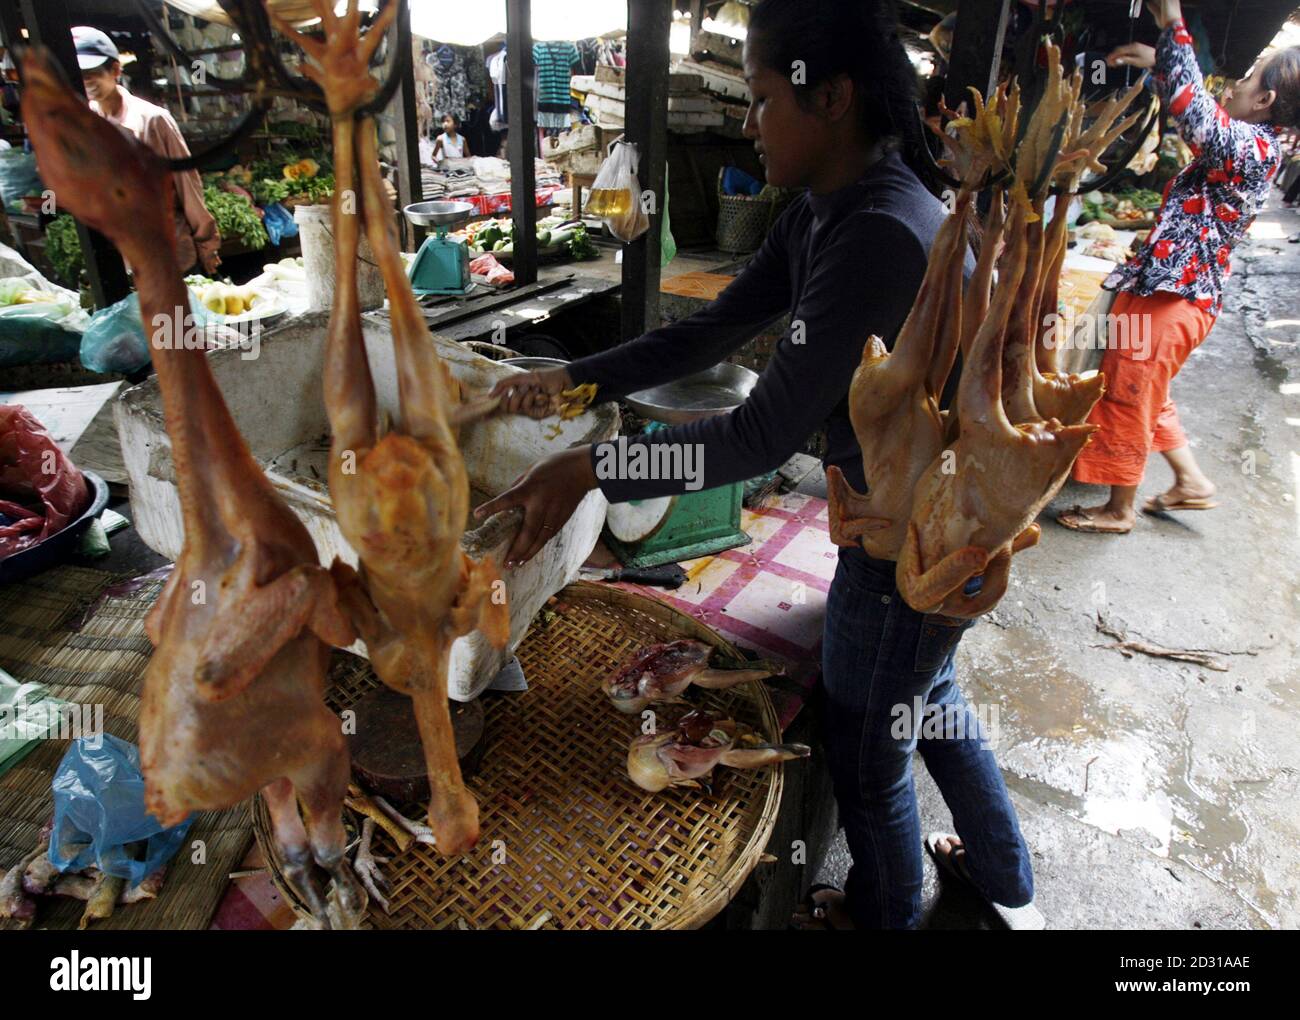 A lady prepares chickens for sale at Phnom Penh market March 27, 2008. The World Bank Group today approved a $6 million grant to support Cambodia's efforts to implement a national plan to minimize the threats from avian and human influenza, and to prepare its health systems to respond to any possible outbreak in the future.  REUTERS/Chor Sokunthea (CAMBODIA) Stock Photo